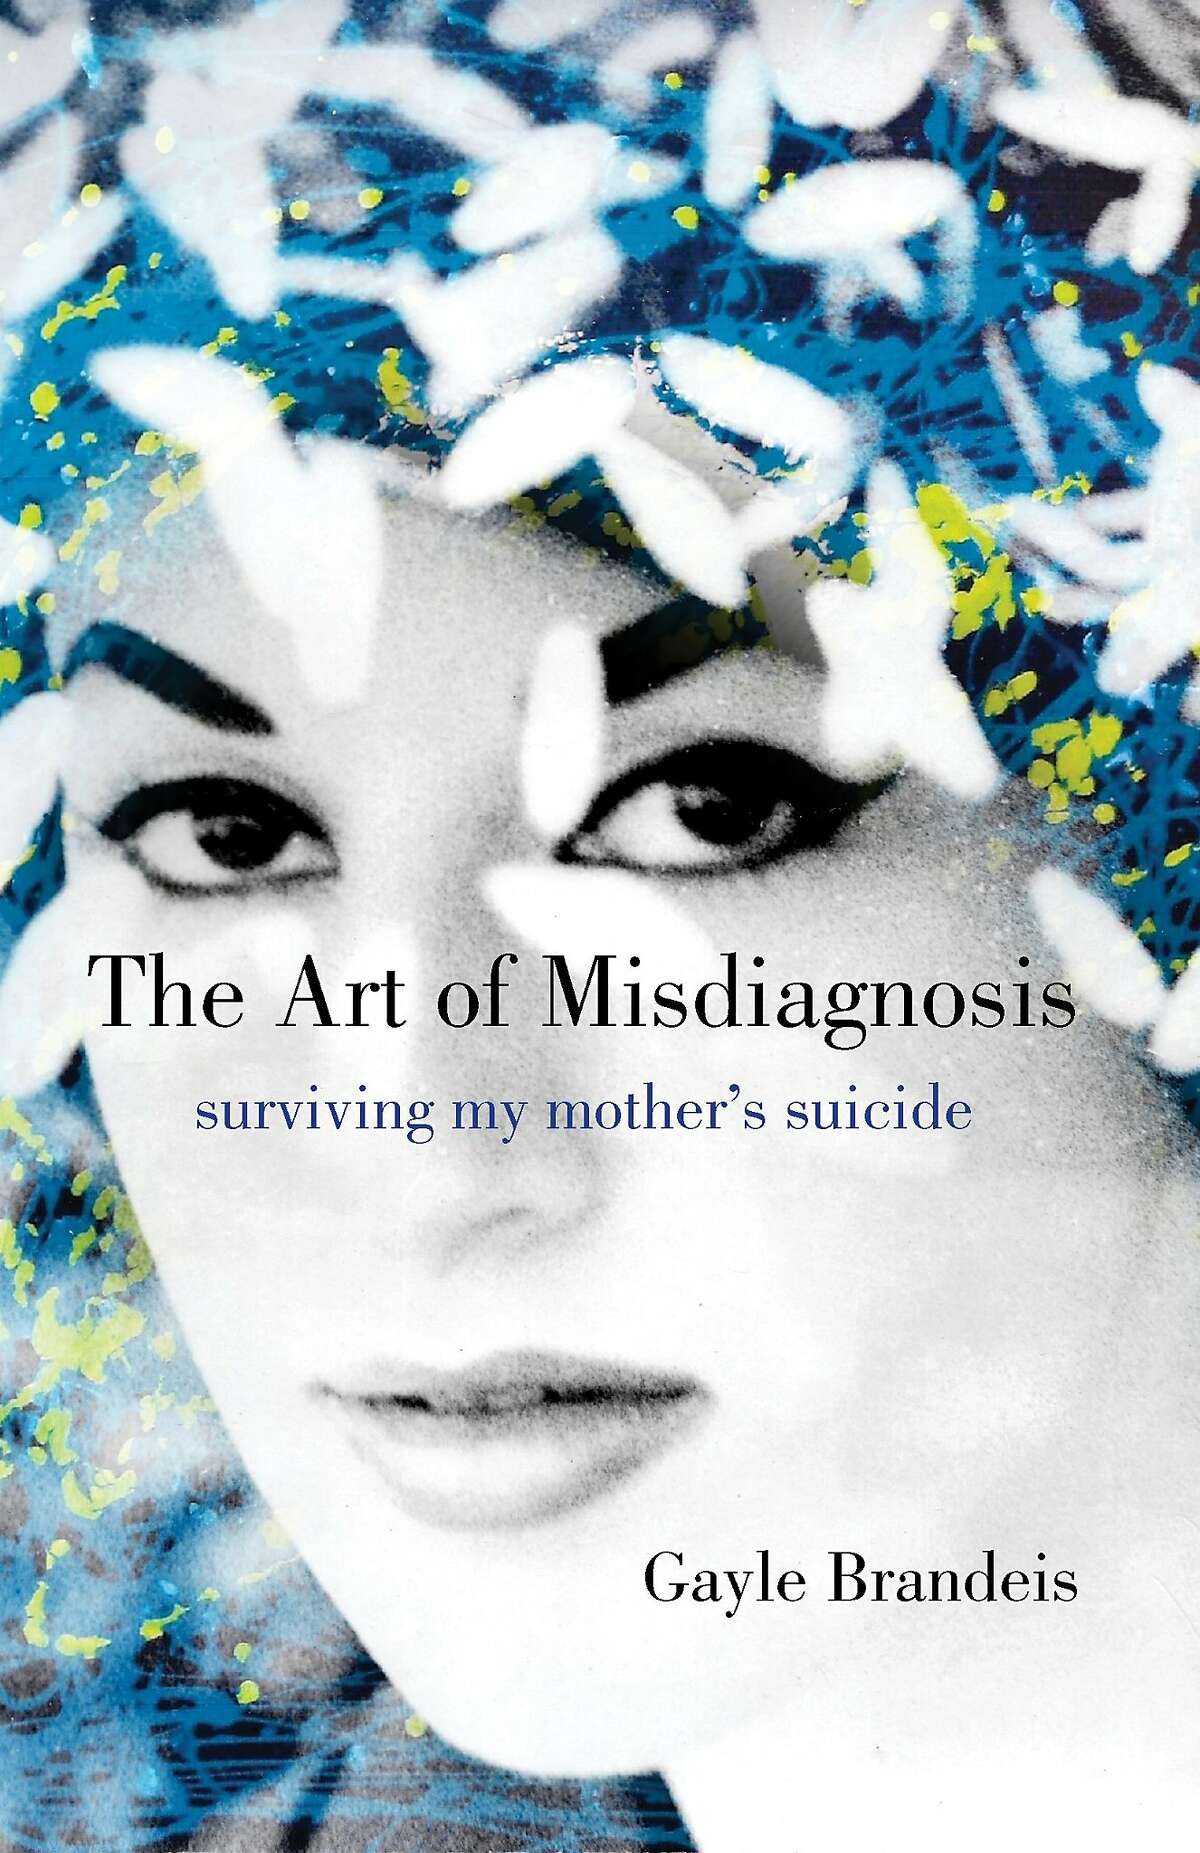 "The Art of Misdiagnosis"